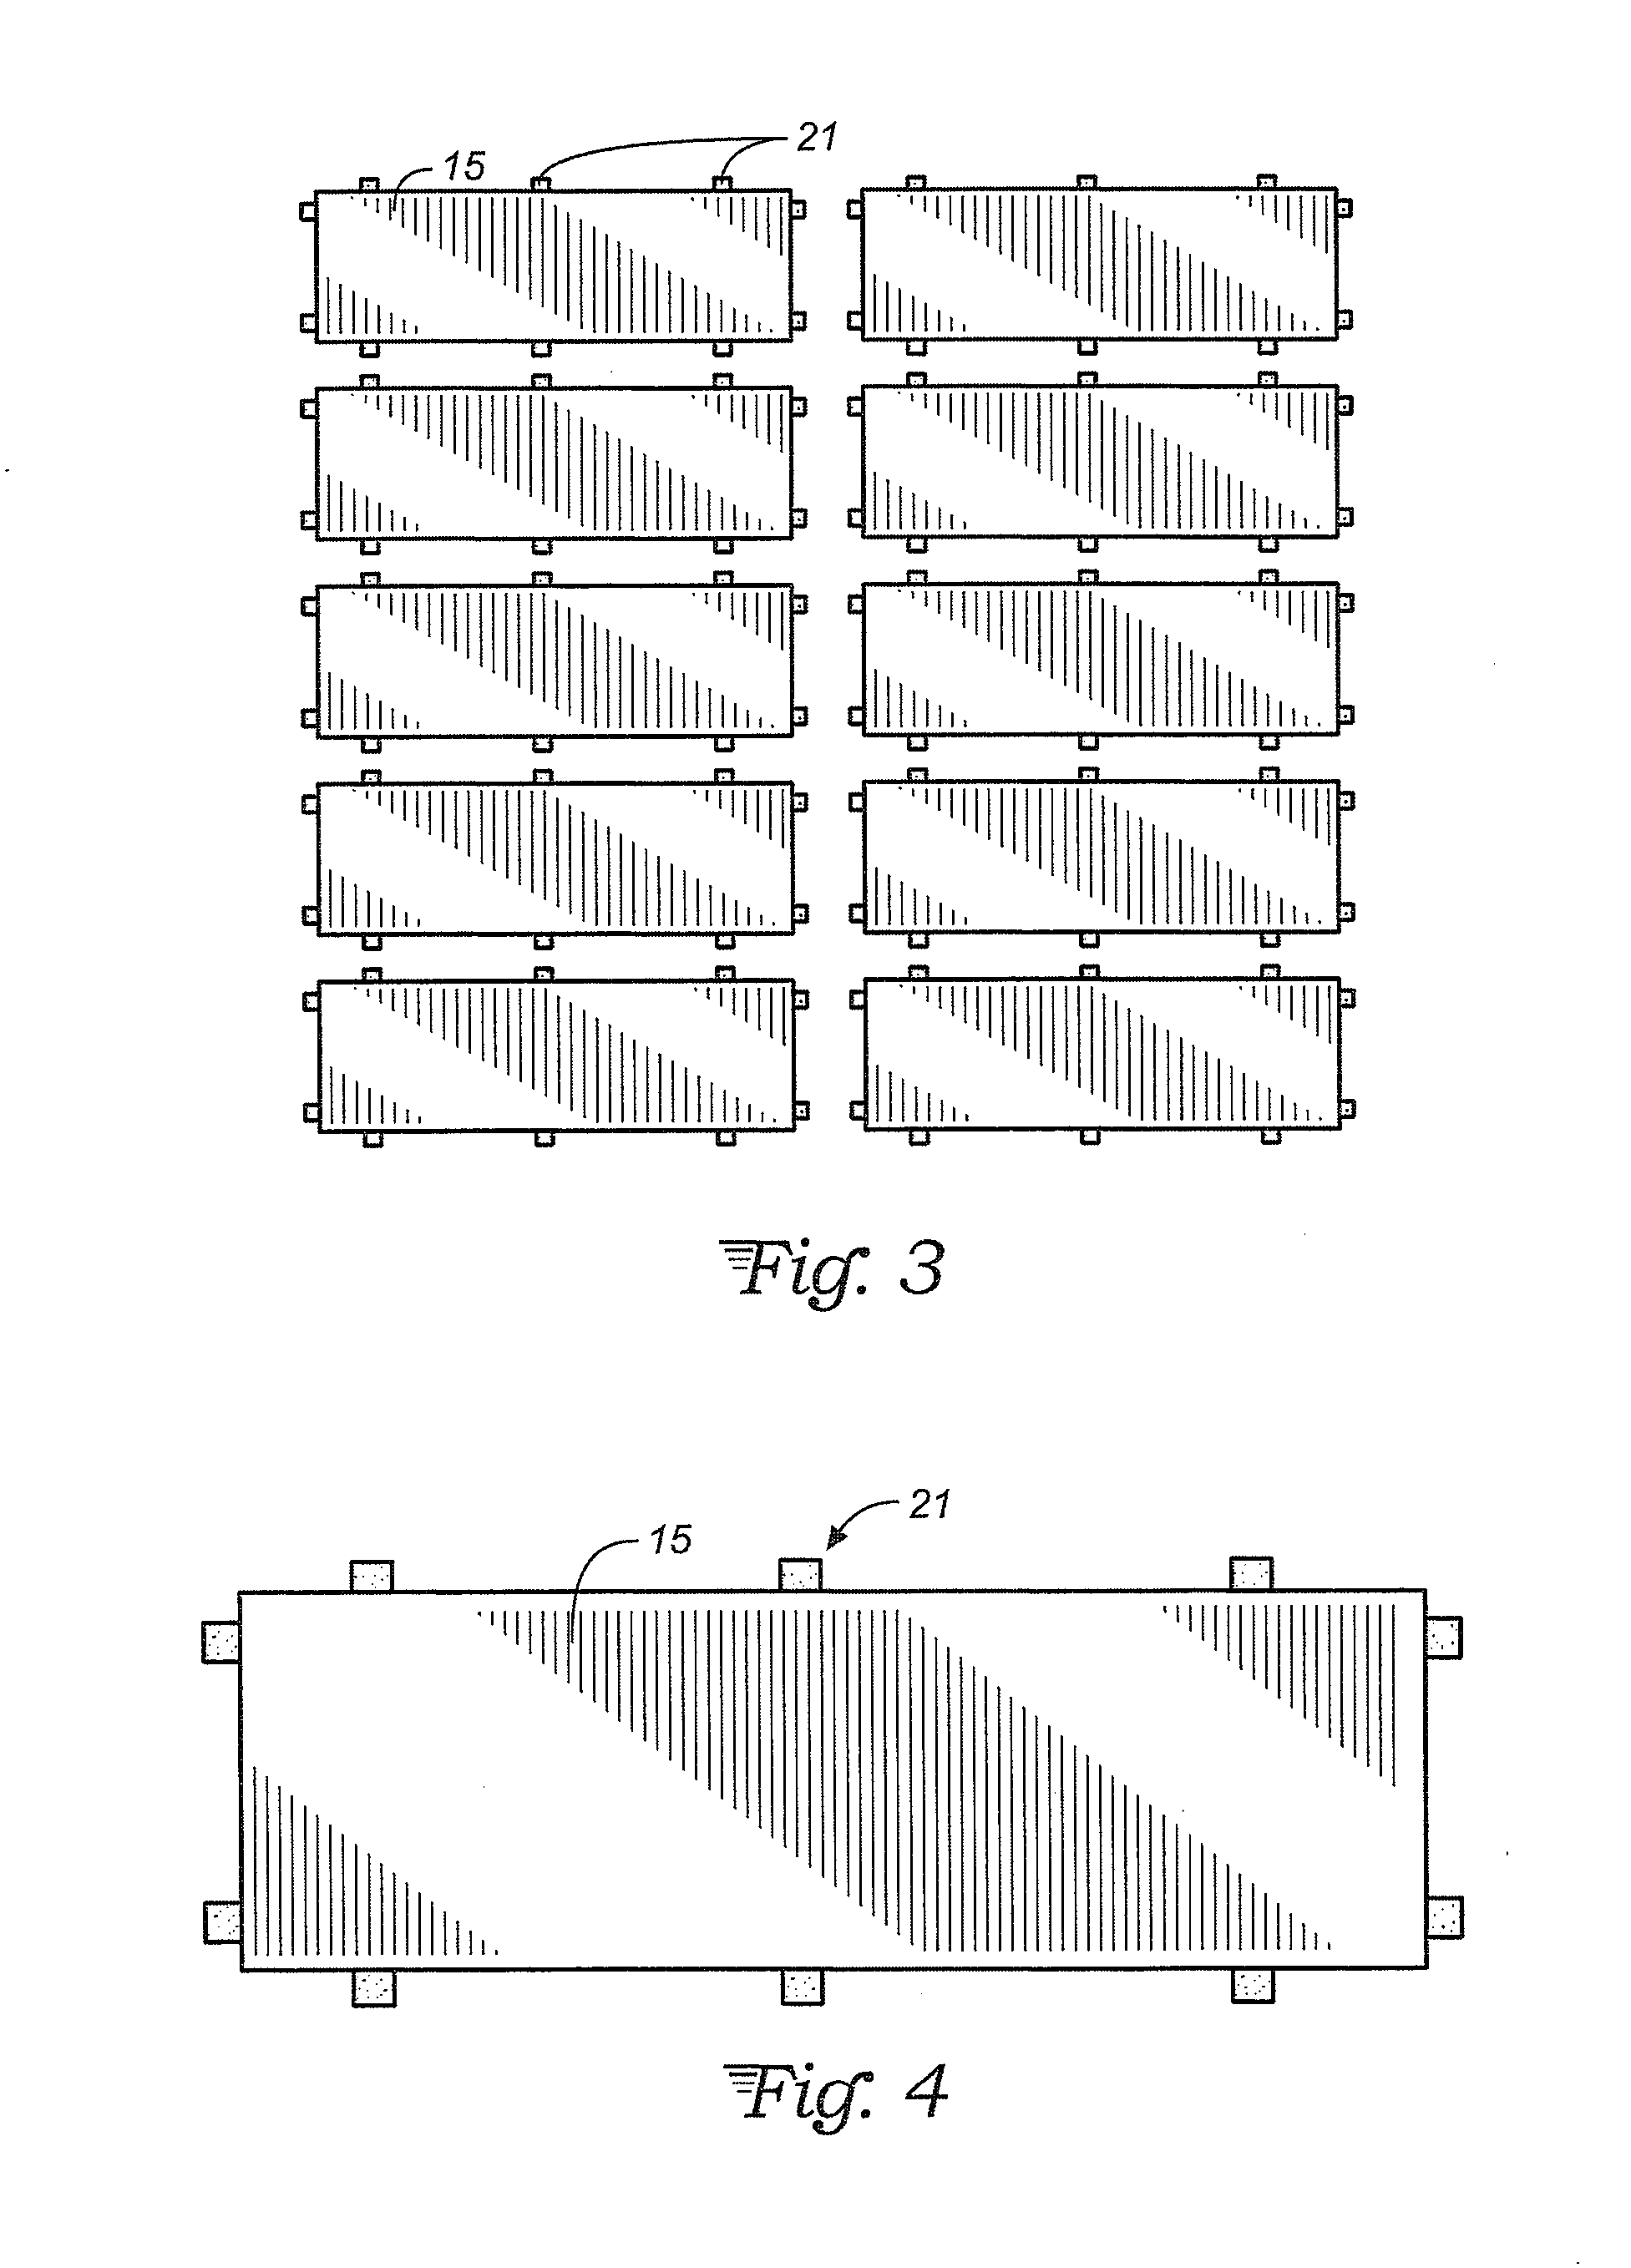 Perforation of films for separation